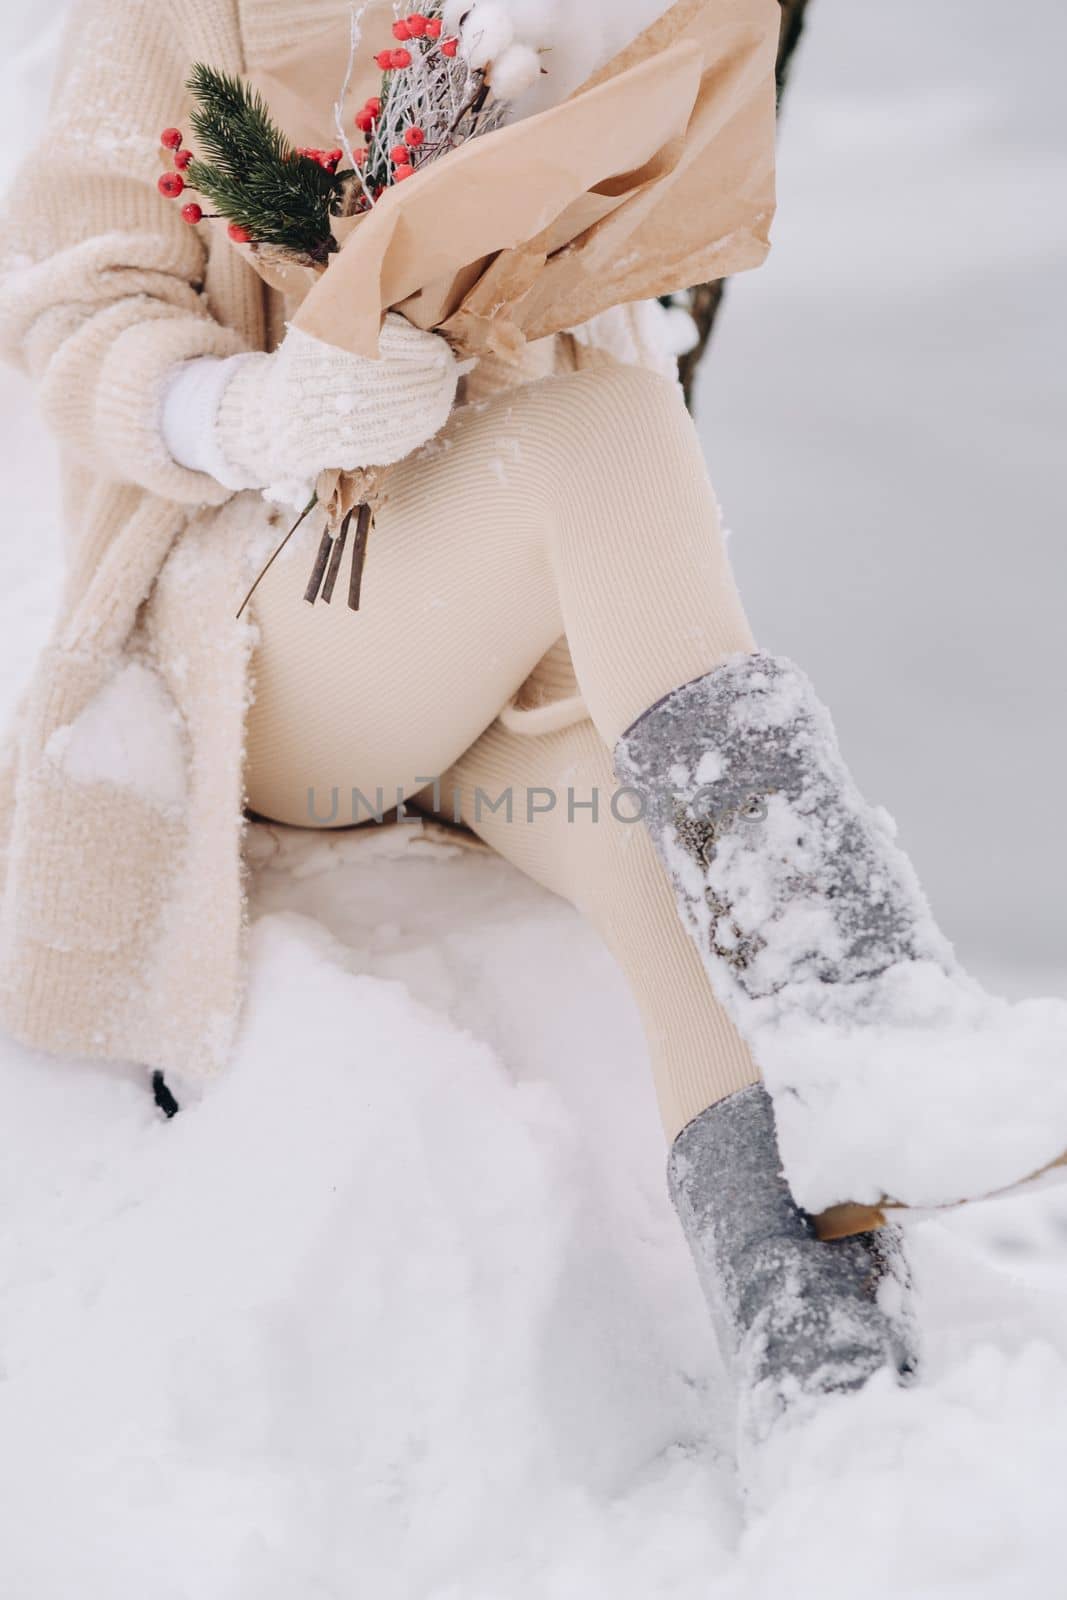 A close-up of the legs of a girl in felt boots with winter flowers sitting in nature in the snowy season. Winter weather by Lobachad